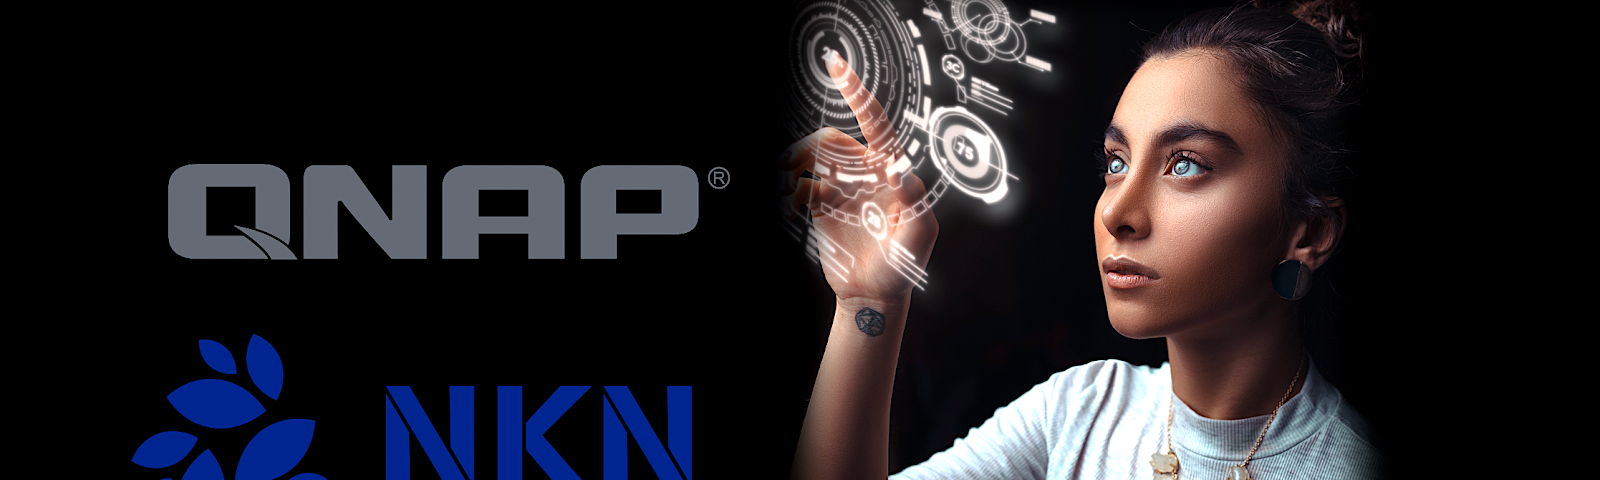 NKN QNAP joint solution for NAS secure remote access